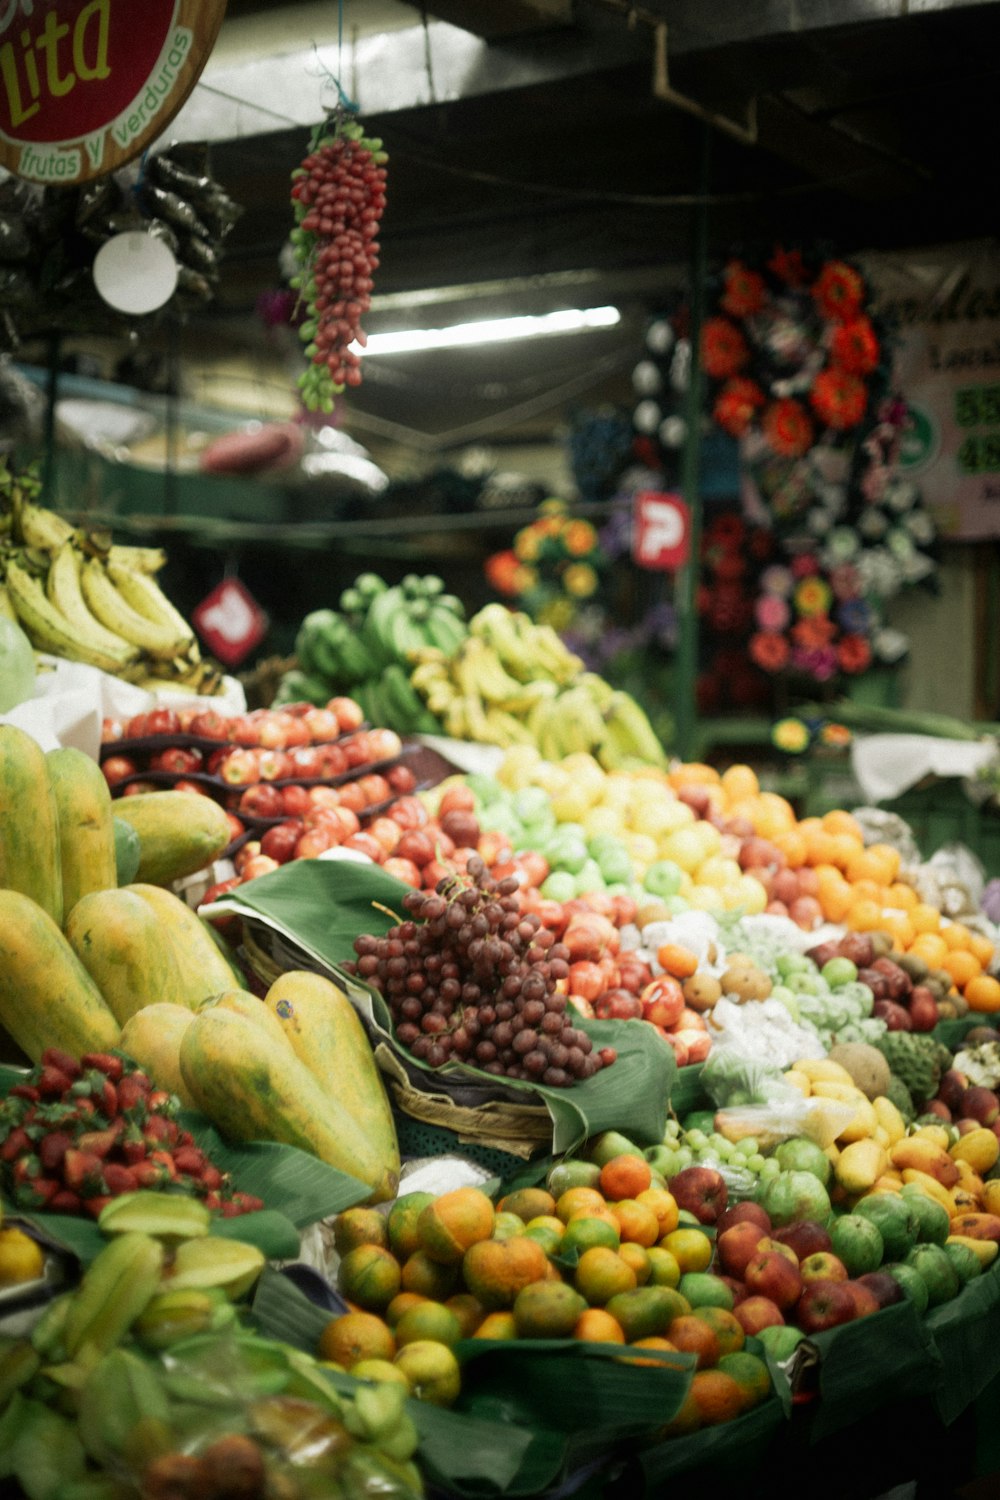 a large display of fruits and vegetables in a store